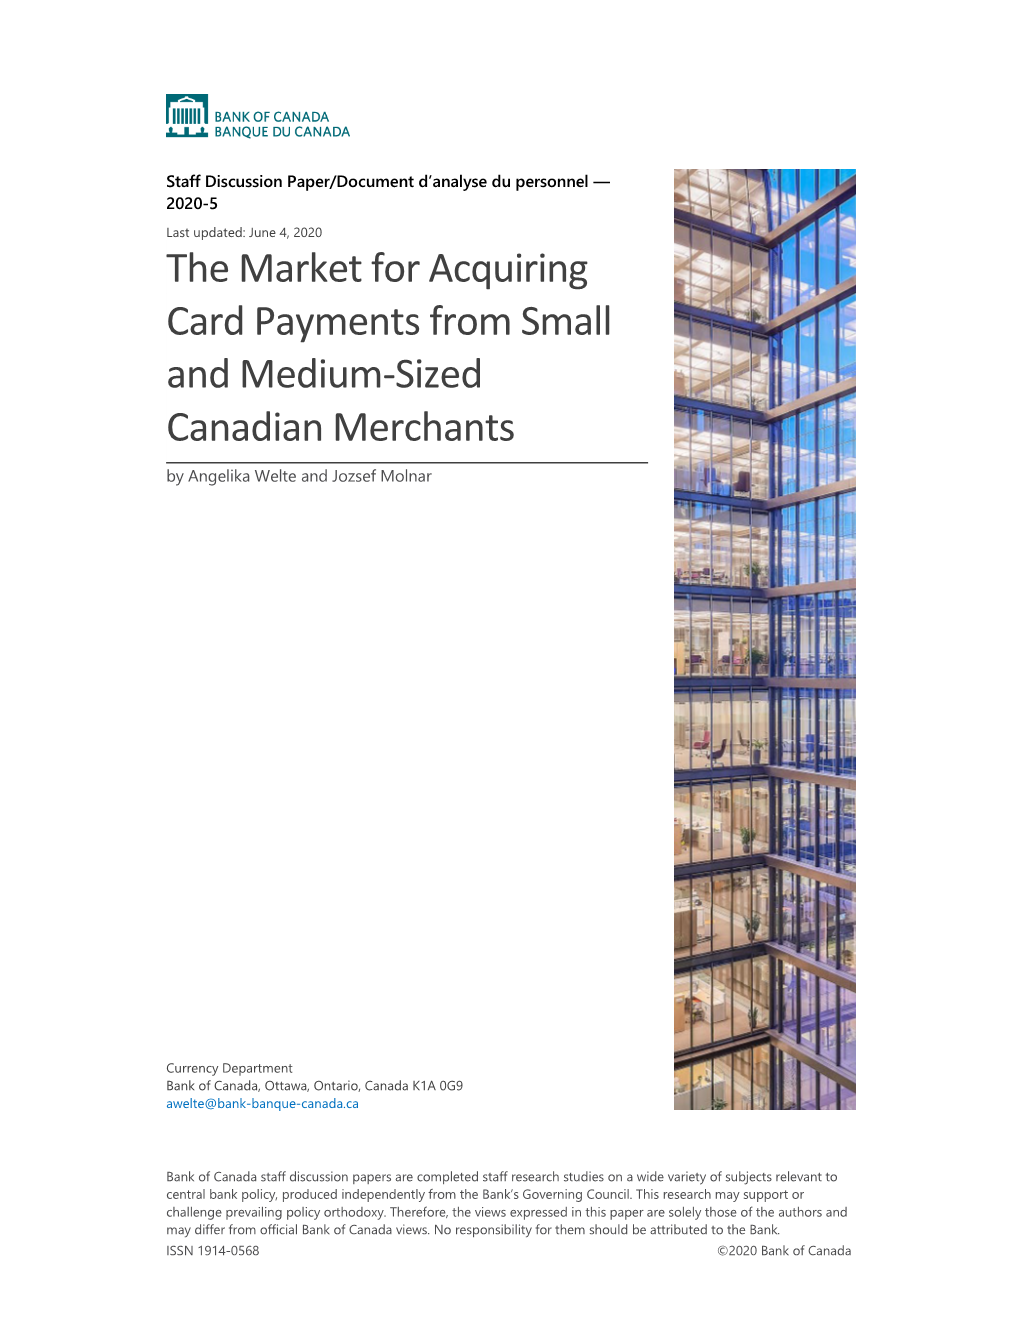 The Market for Acquiring Card Payments from Small and Medium-Sized Canadian Merchants by Angelika Welte and Jozsef Molnar